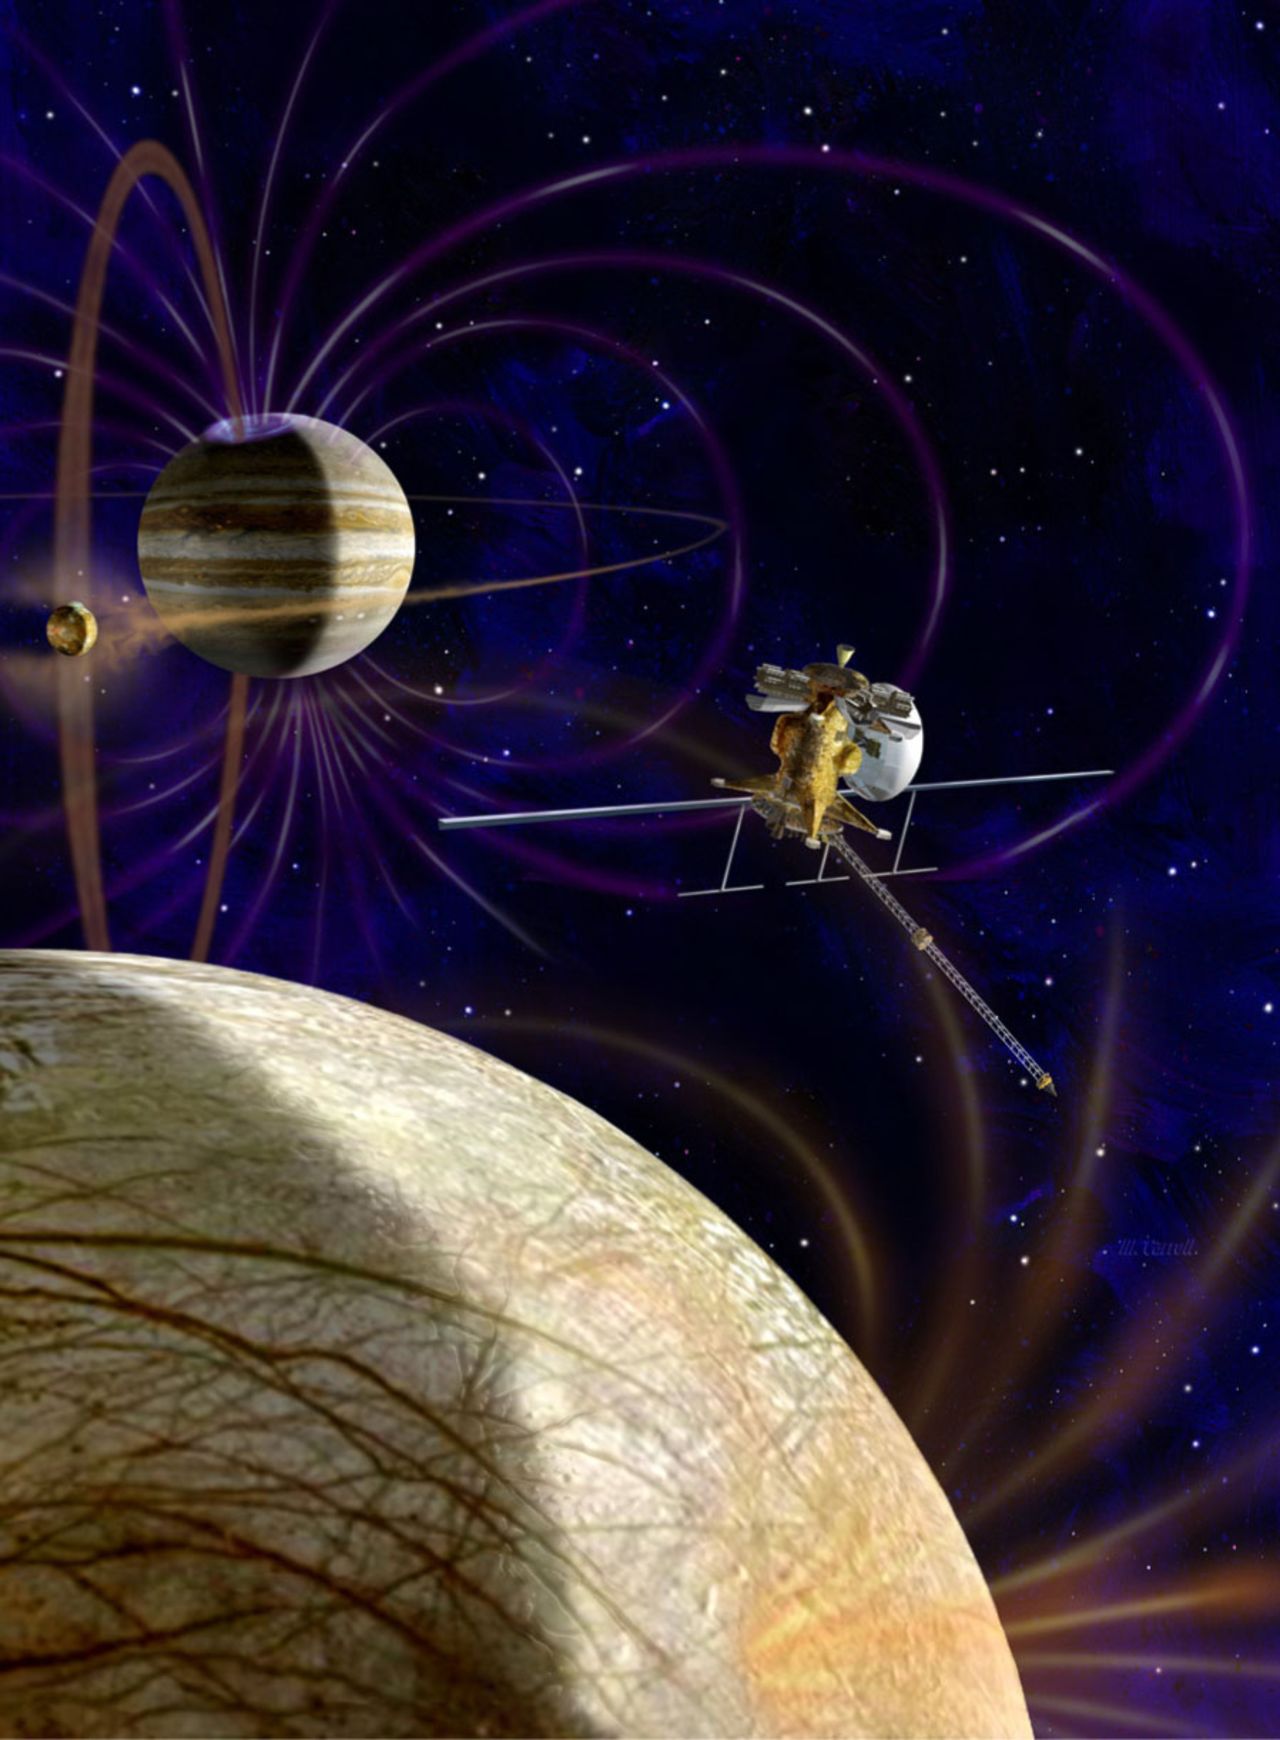 Space agencies want to send an orbiter to Europa and another of Jupiter's moons. An artist shows what this could look like.